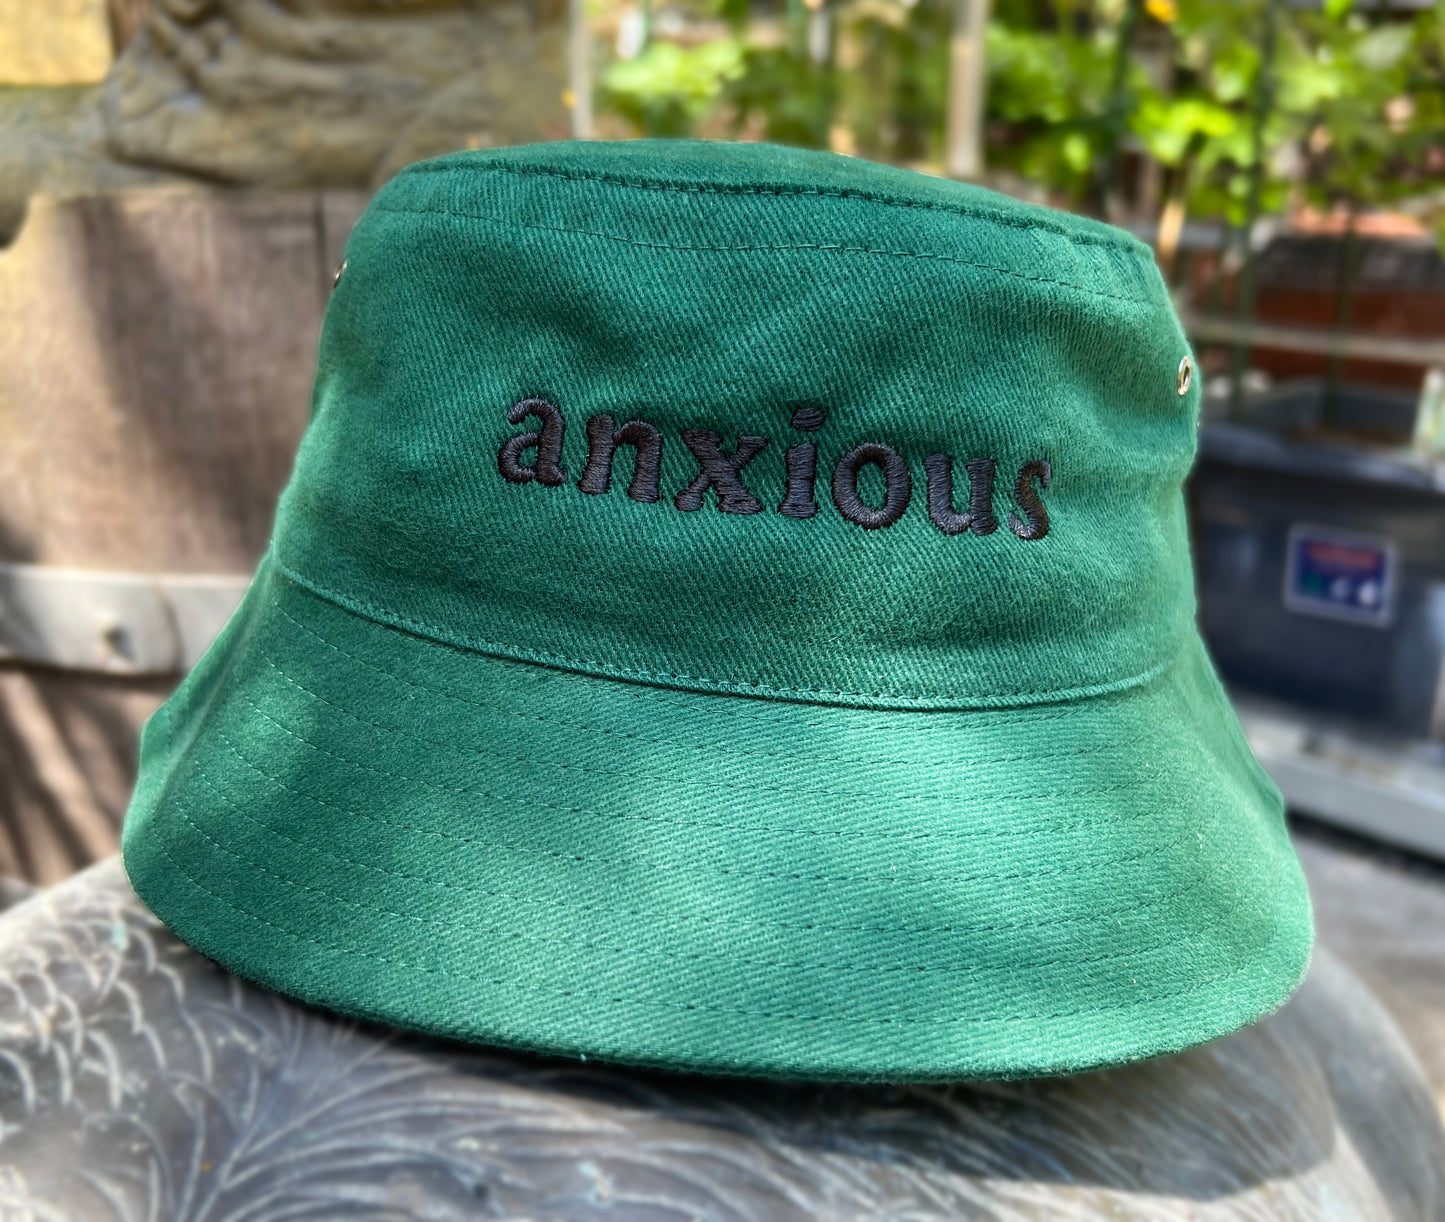 Bucket of Anxiety - Cooked Concepts (the best hat for sun protection, but a warning to others your anxiety is a thing. Bottle green with black embroidery saying ANXIOUS)